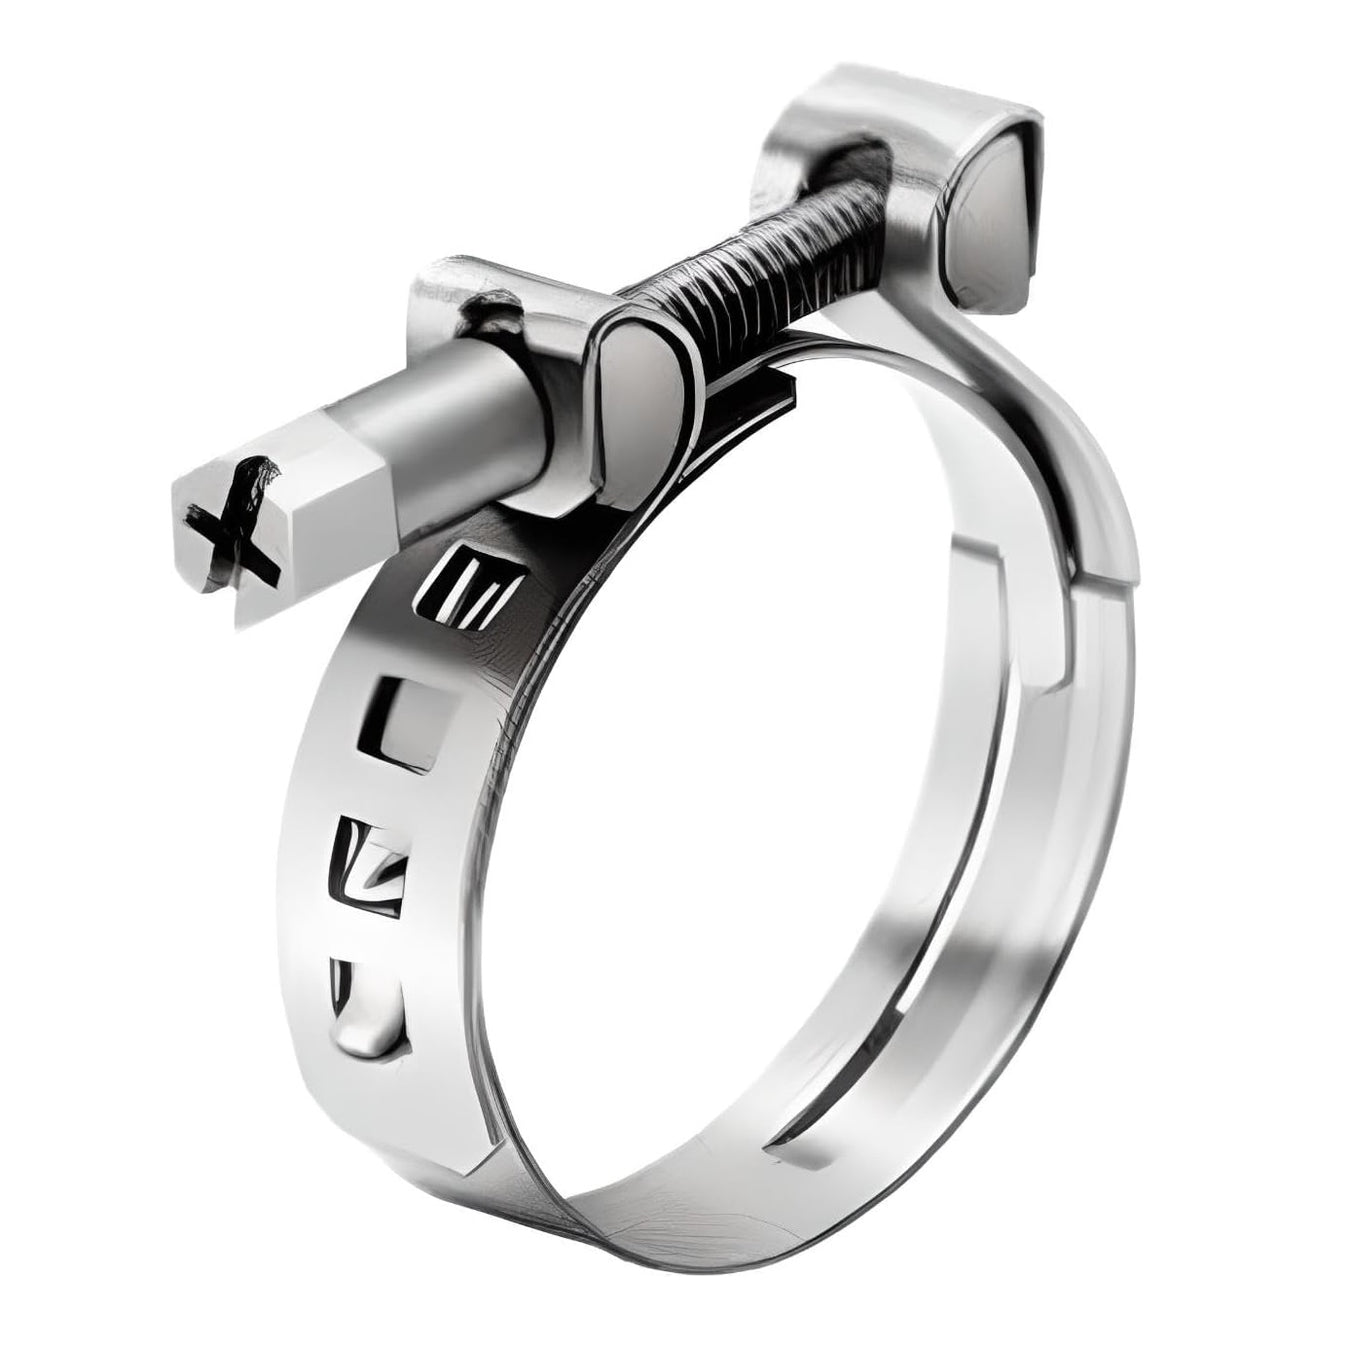 178 Series - Stainless Steel StepLess Screw Clamps